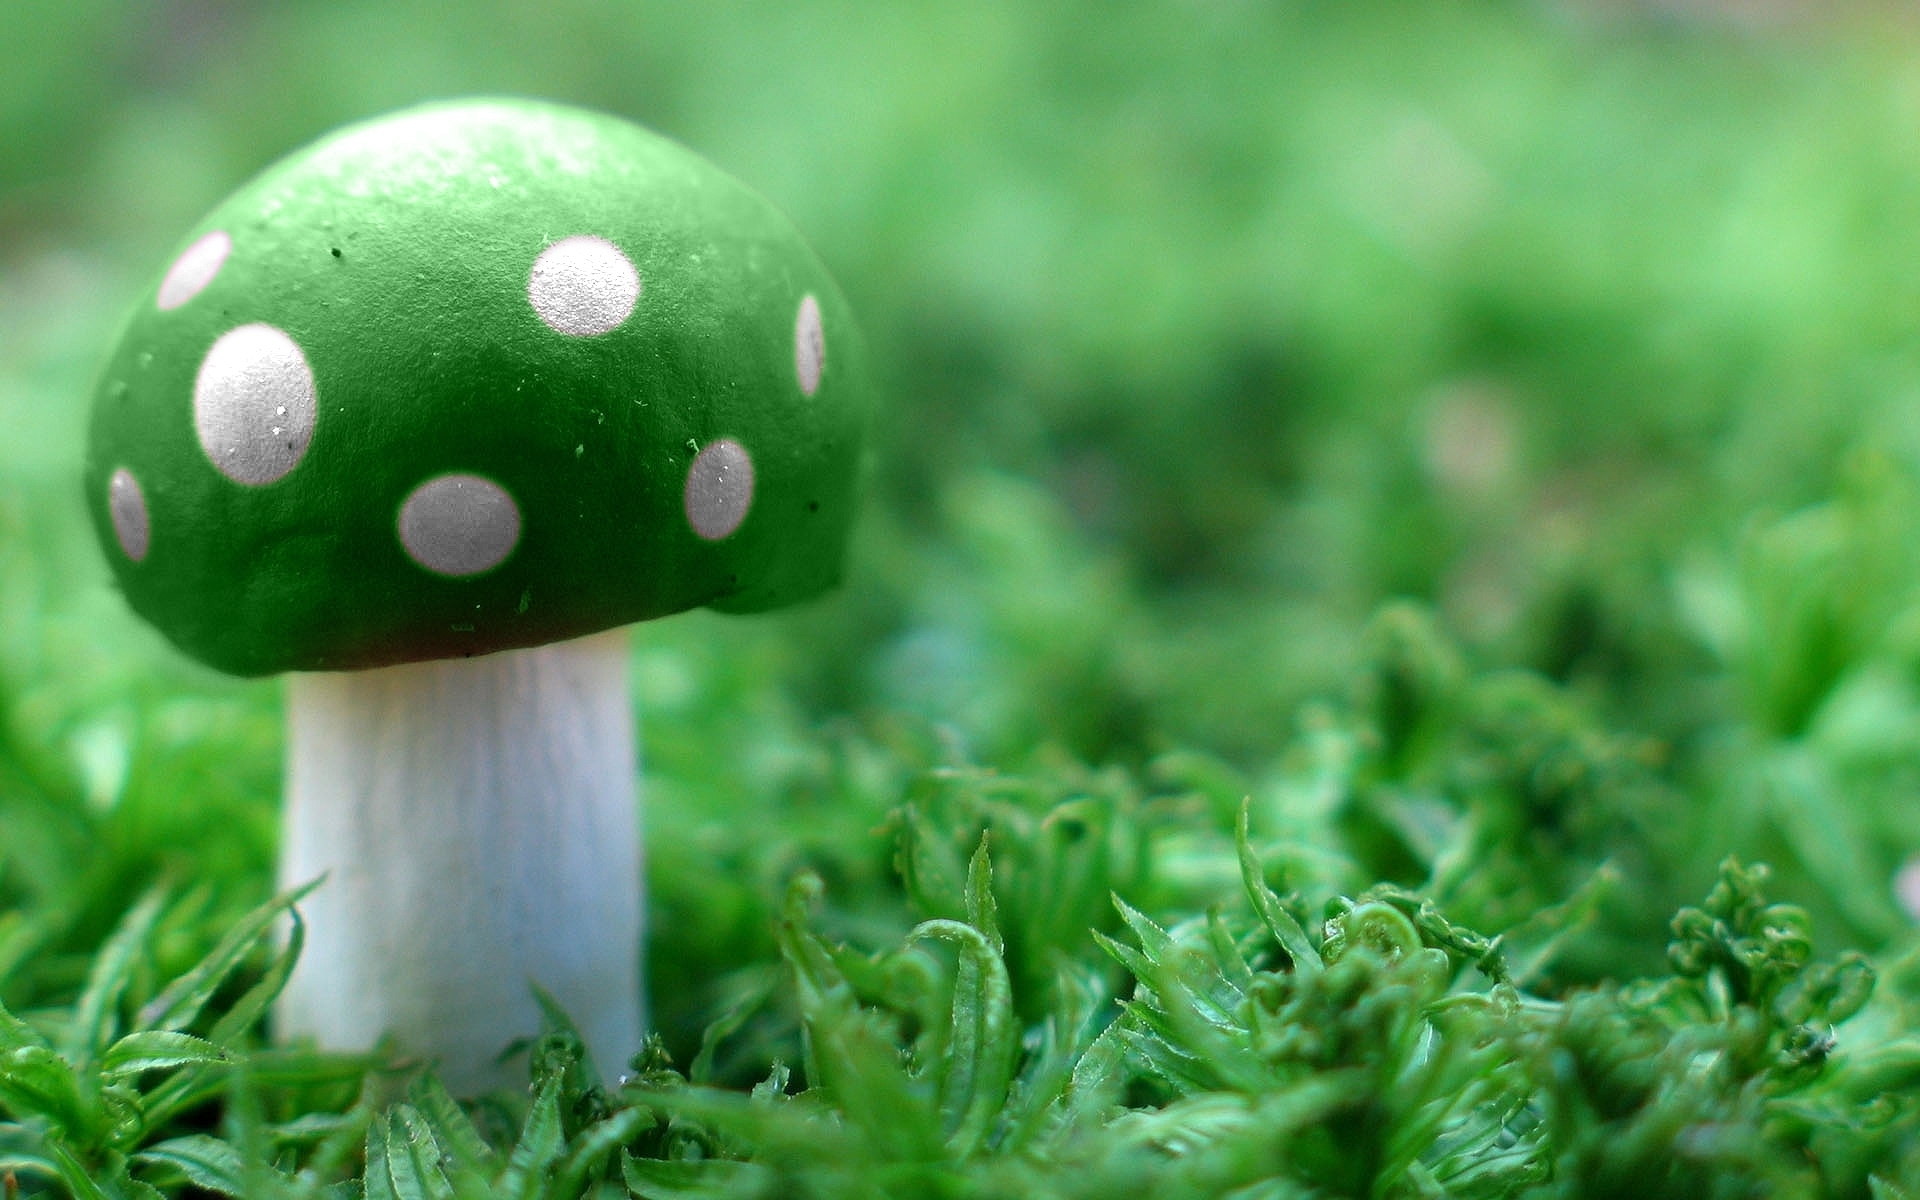 Mushroom 4K wallpaper for your desktop or mobile screen free and easy to download